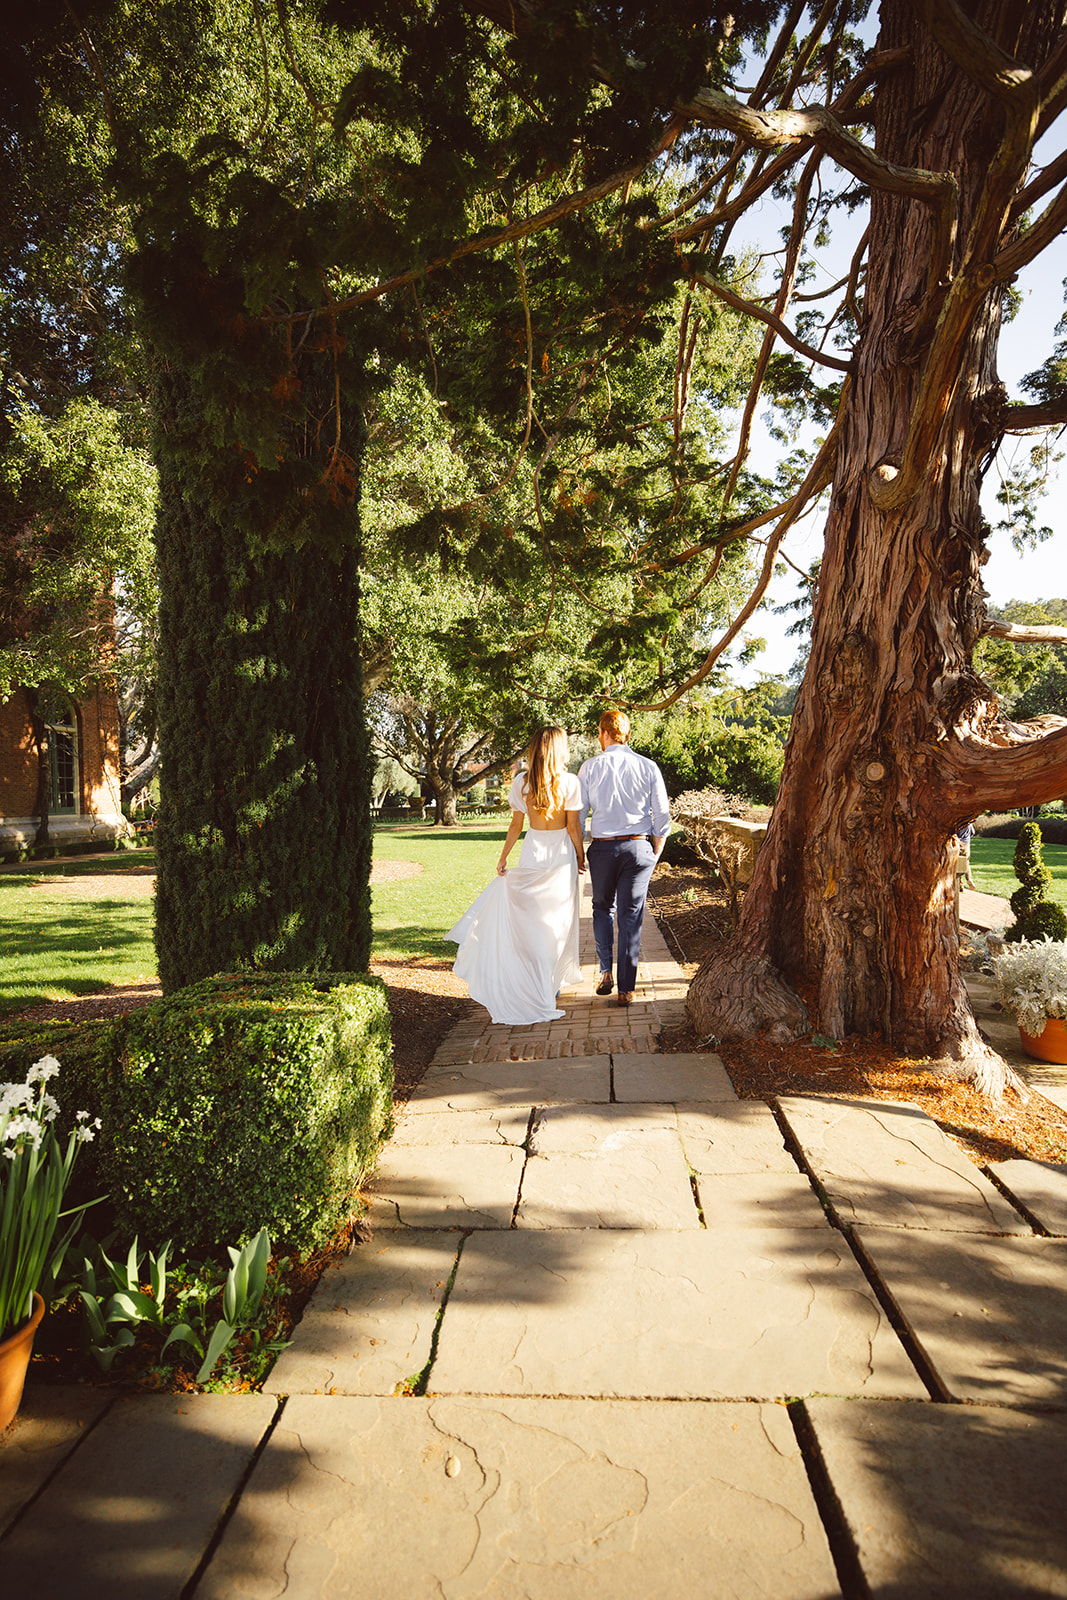 A couple embracing and smiling at Filoli Gardens, taking their engagement photos, both dressed in casual attire.